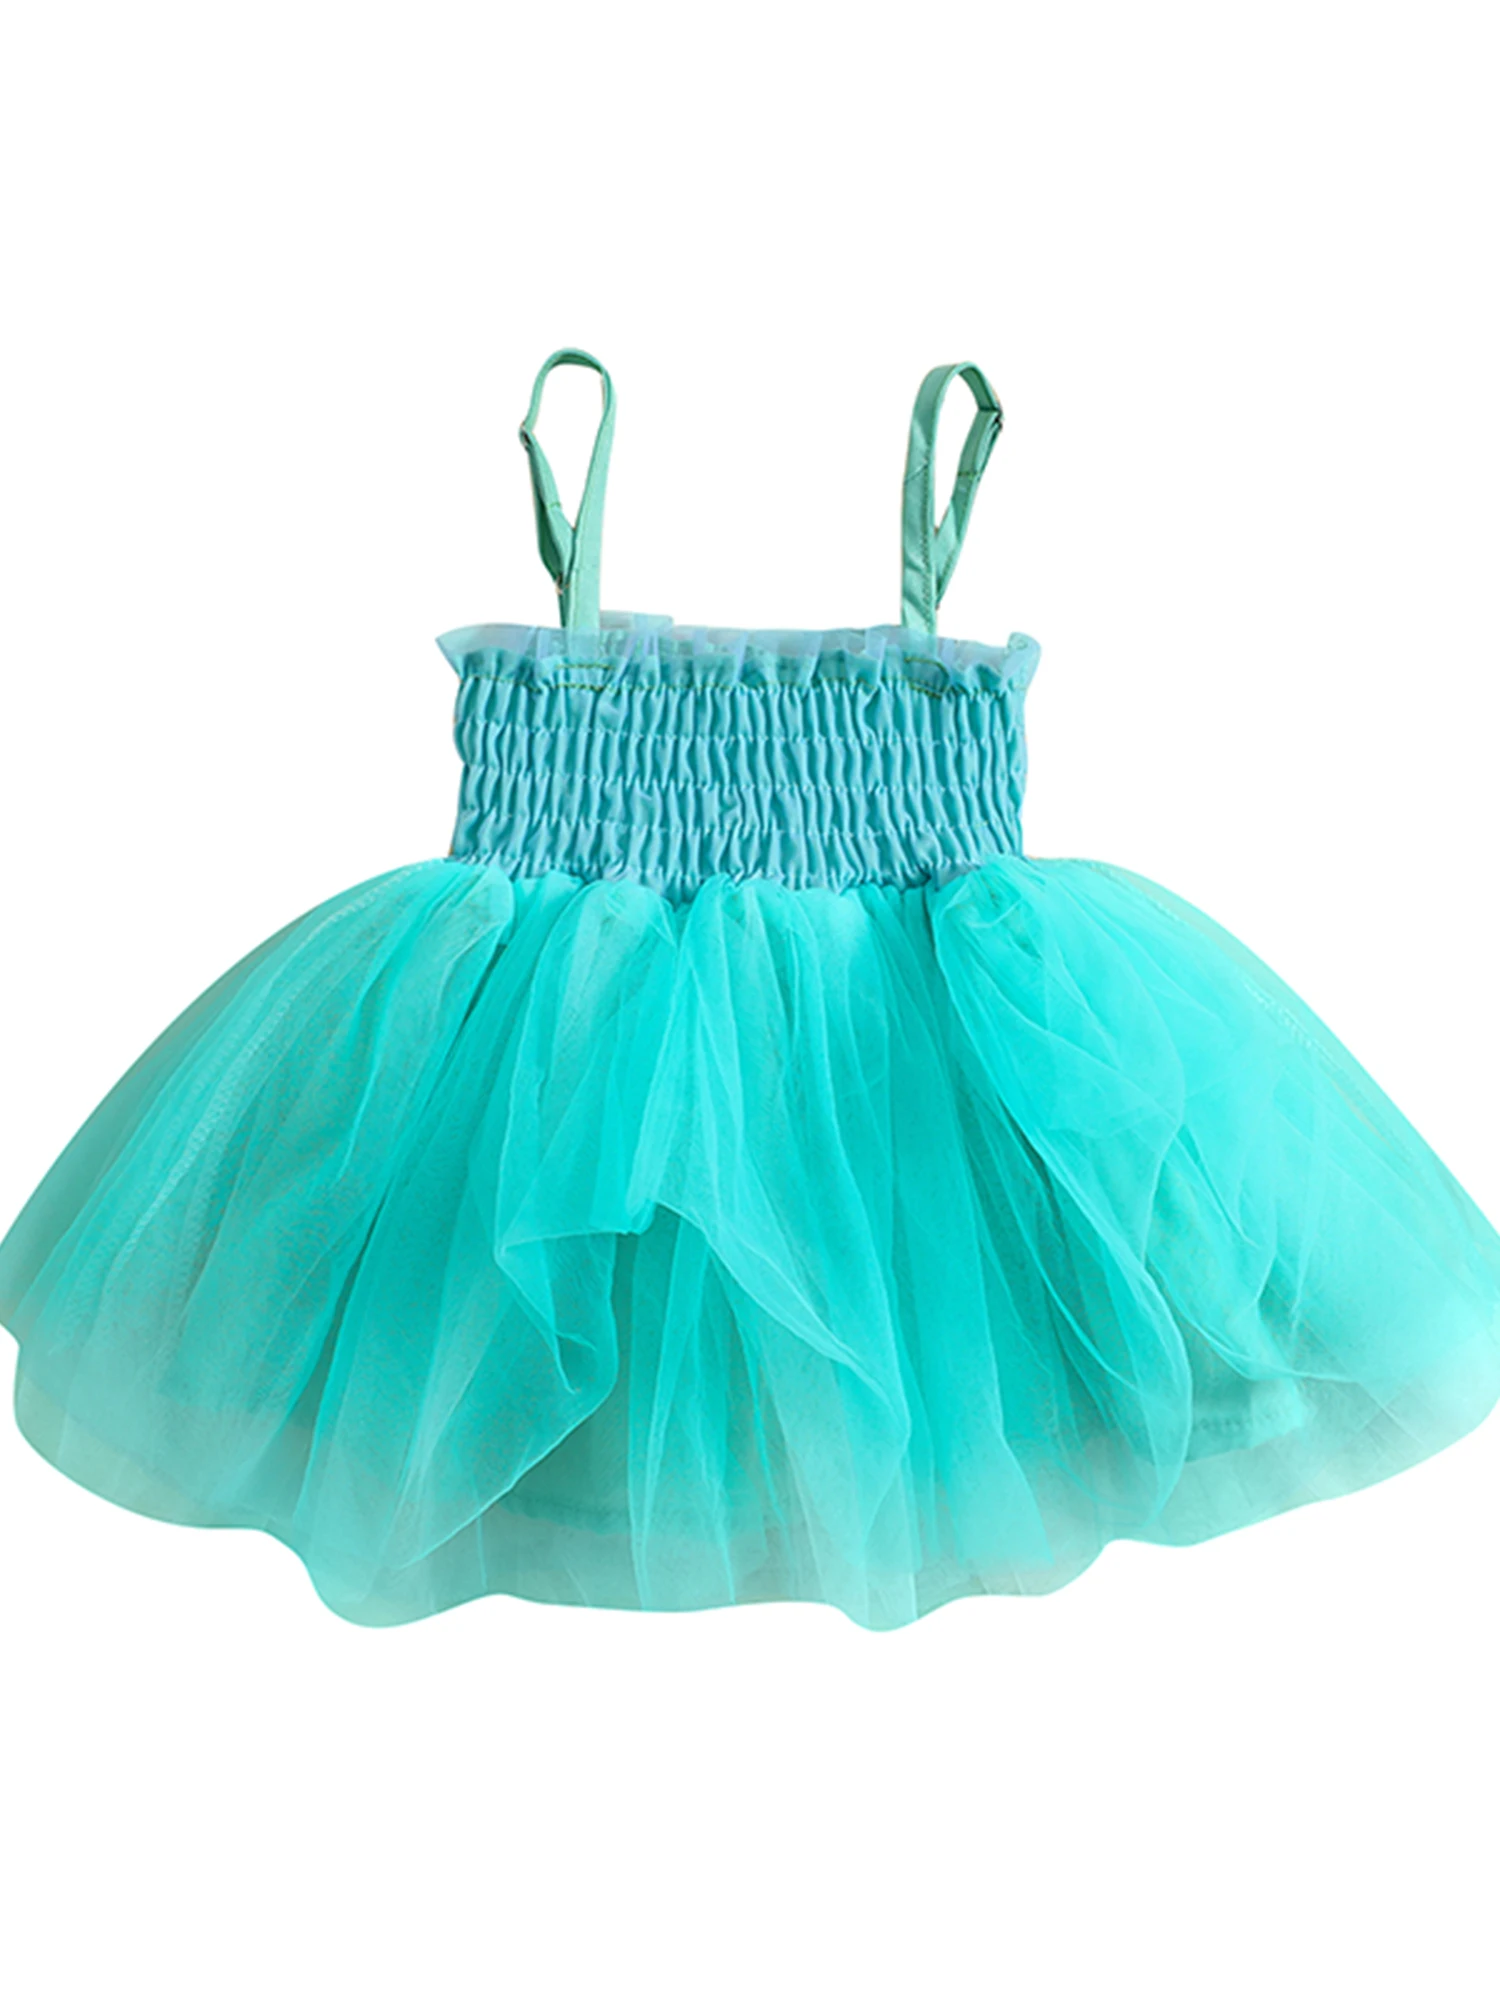 

Baby Girl Tulle Tutu Dress Sleeveless Strap Pleated A-Line Layered Princess Dress Summer Halter Lace Sundress (A-Teal 12-18